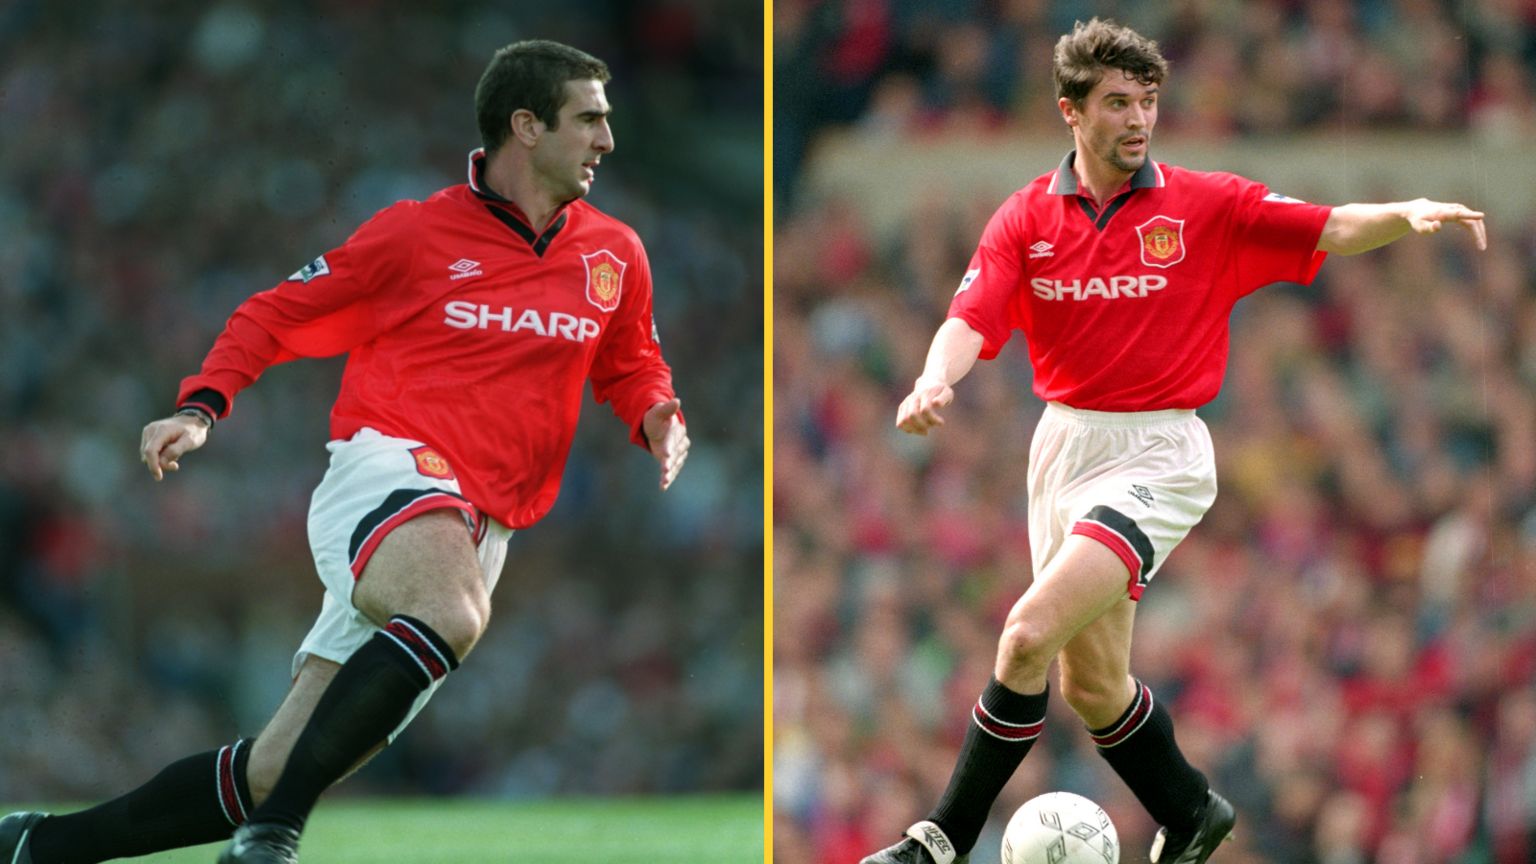 Former Manchester United players Eric Cantona and Roy Keane